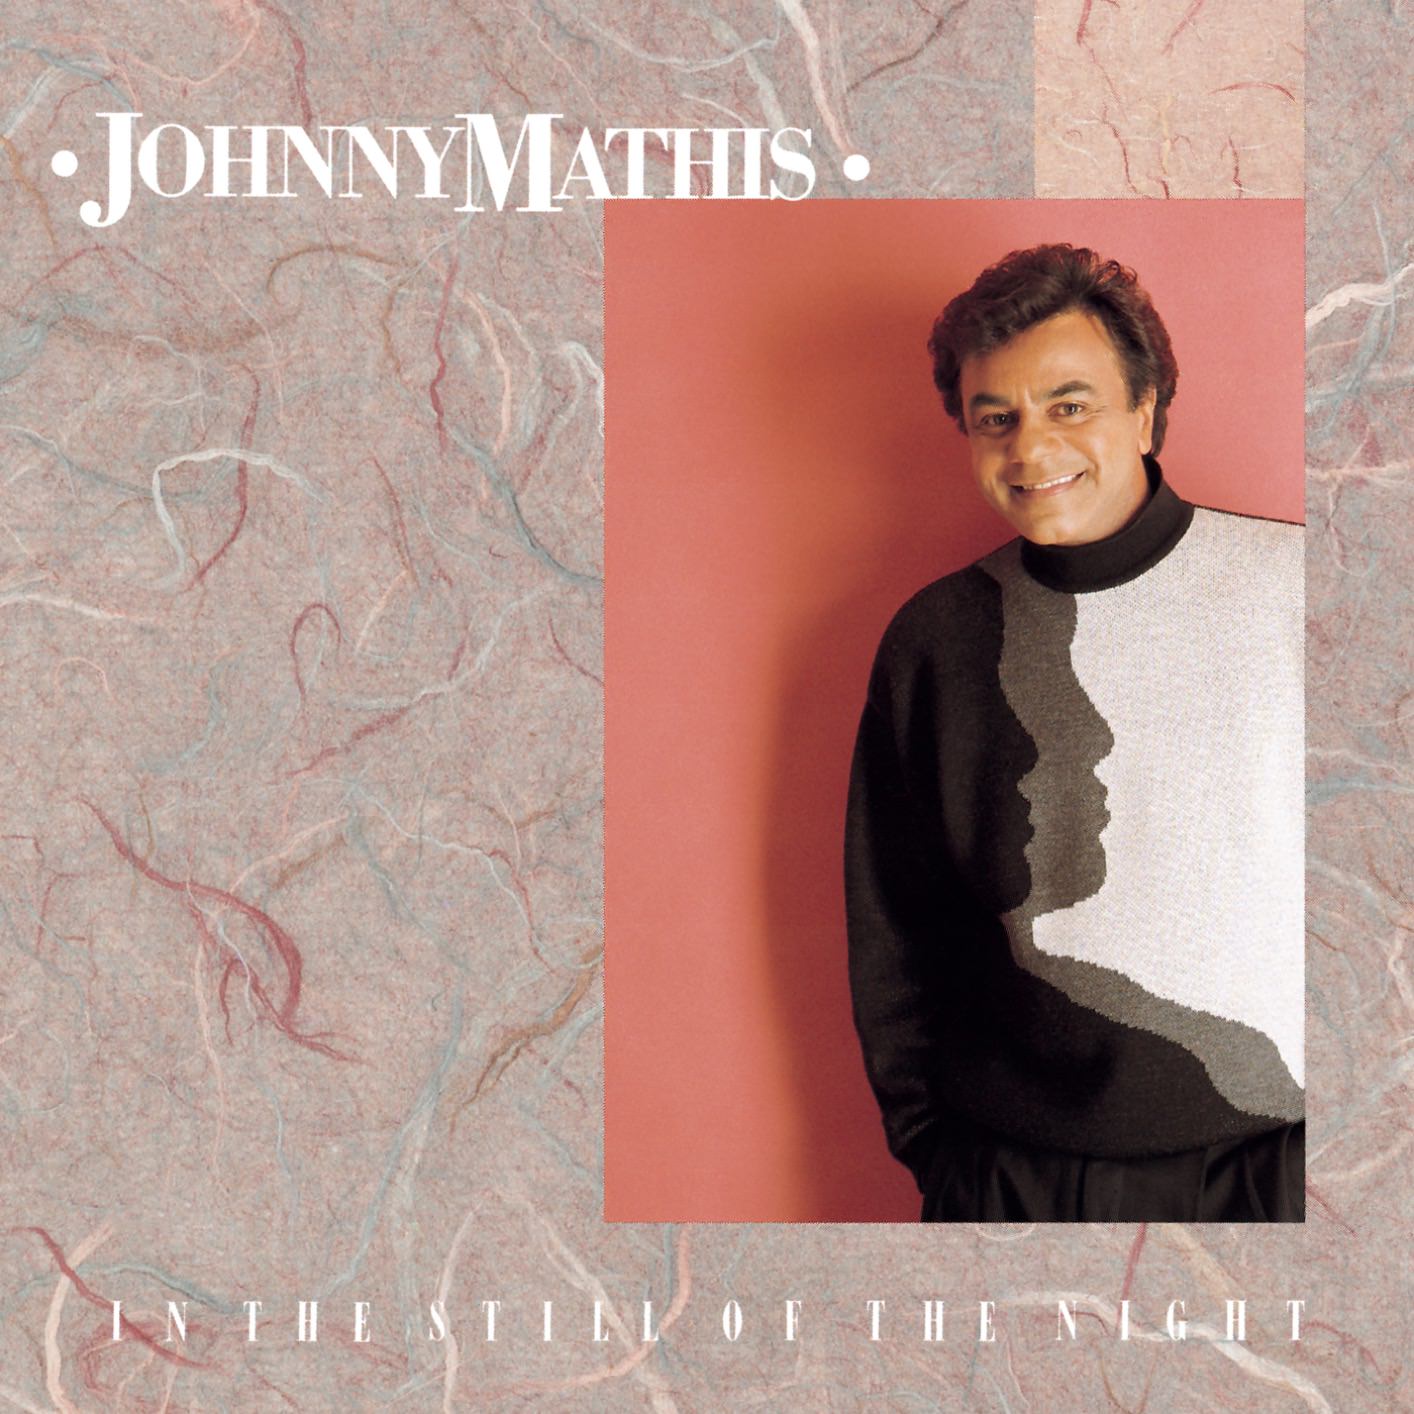 Johnny Mathis – In The Still Of The Night (1989/2018) [FLAC 24bit/44,1kHz]